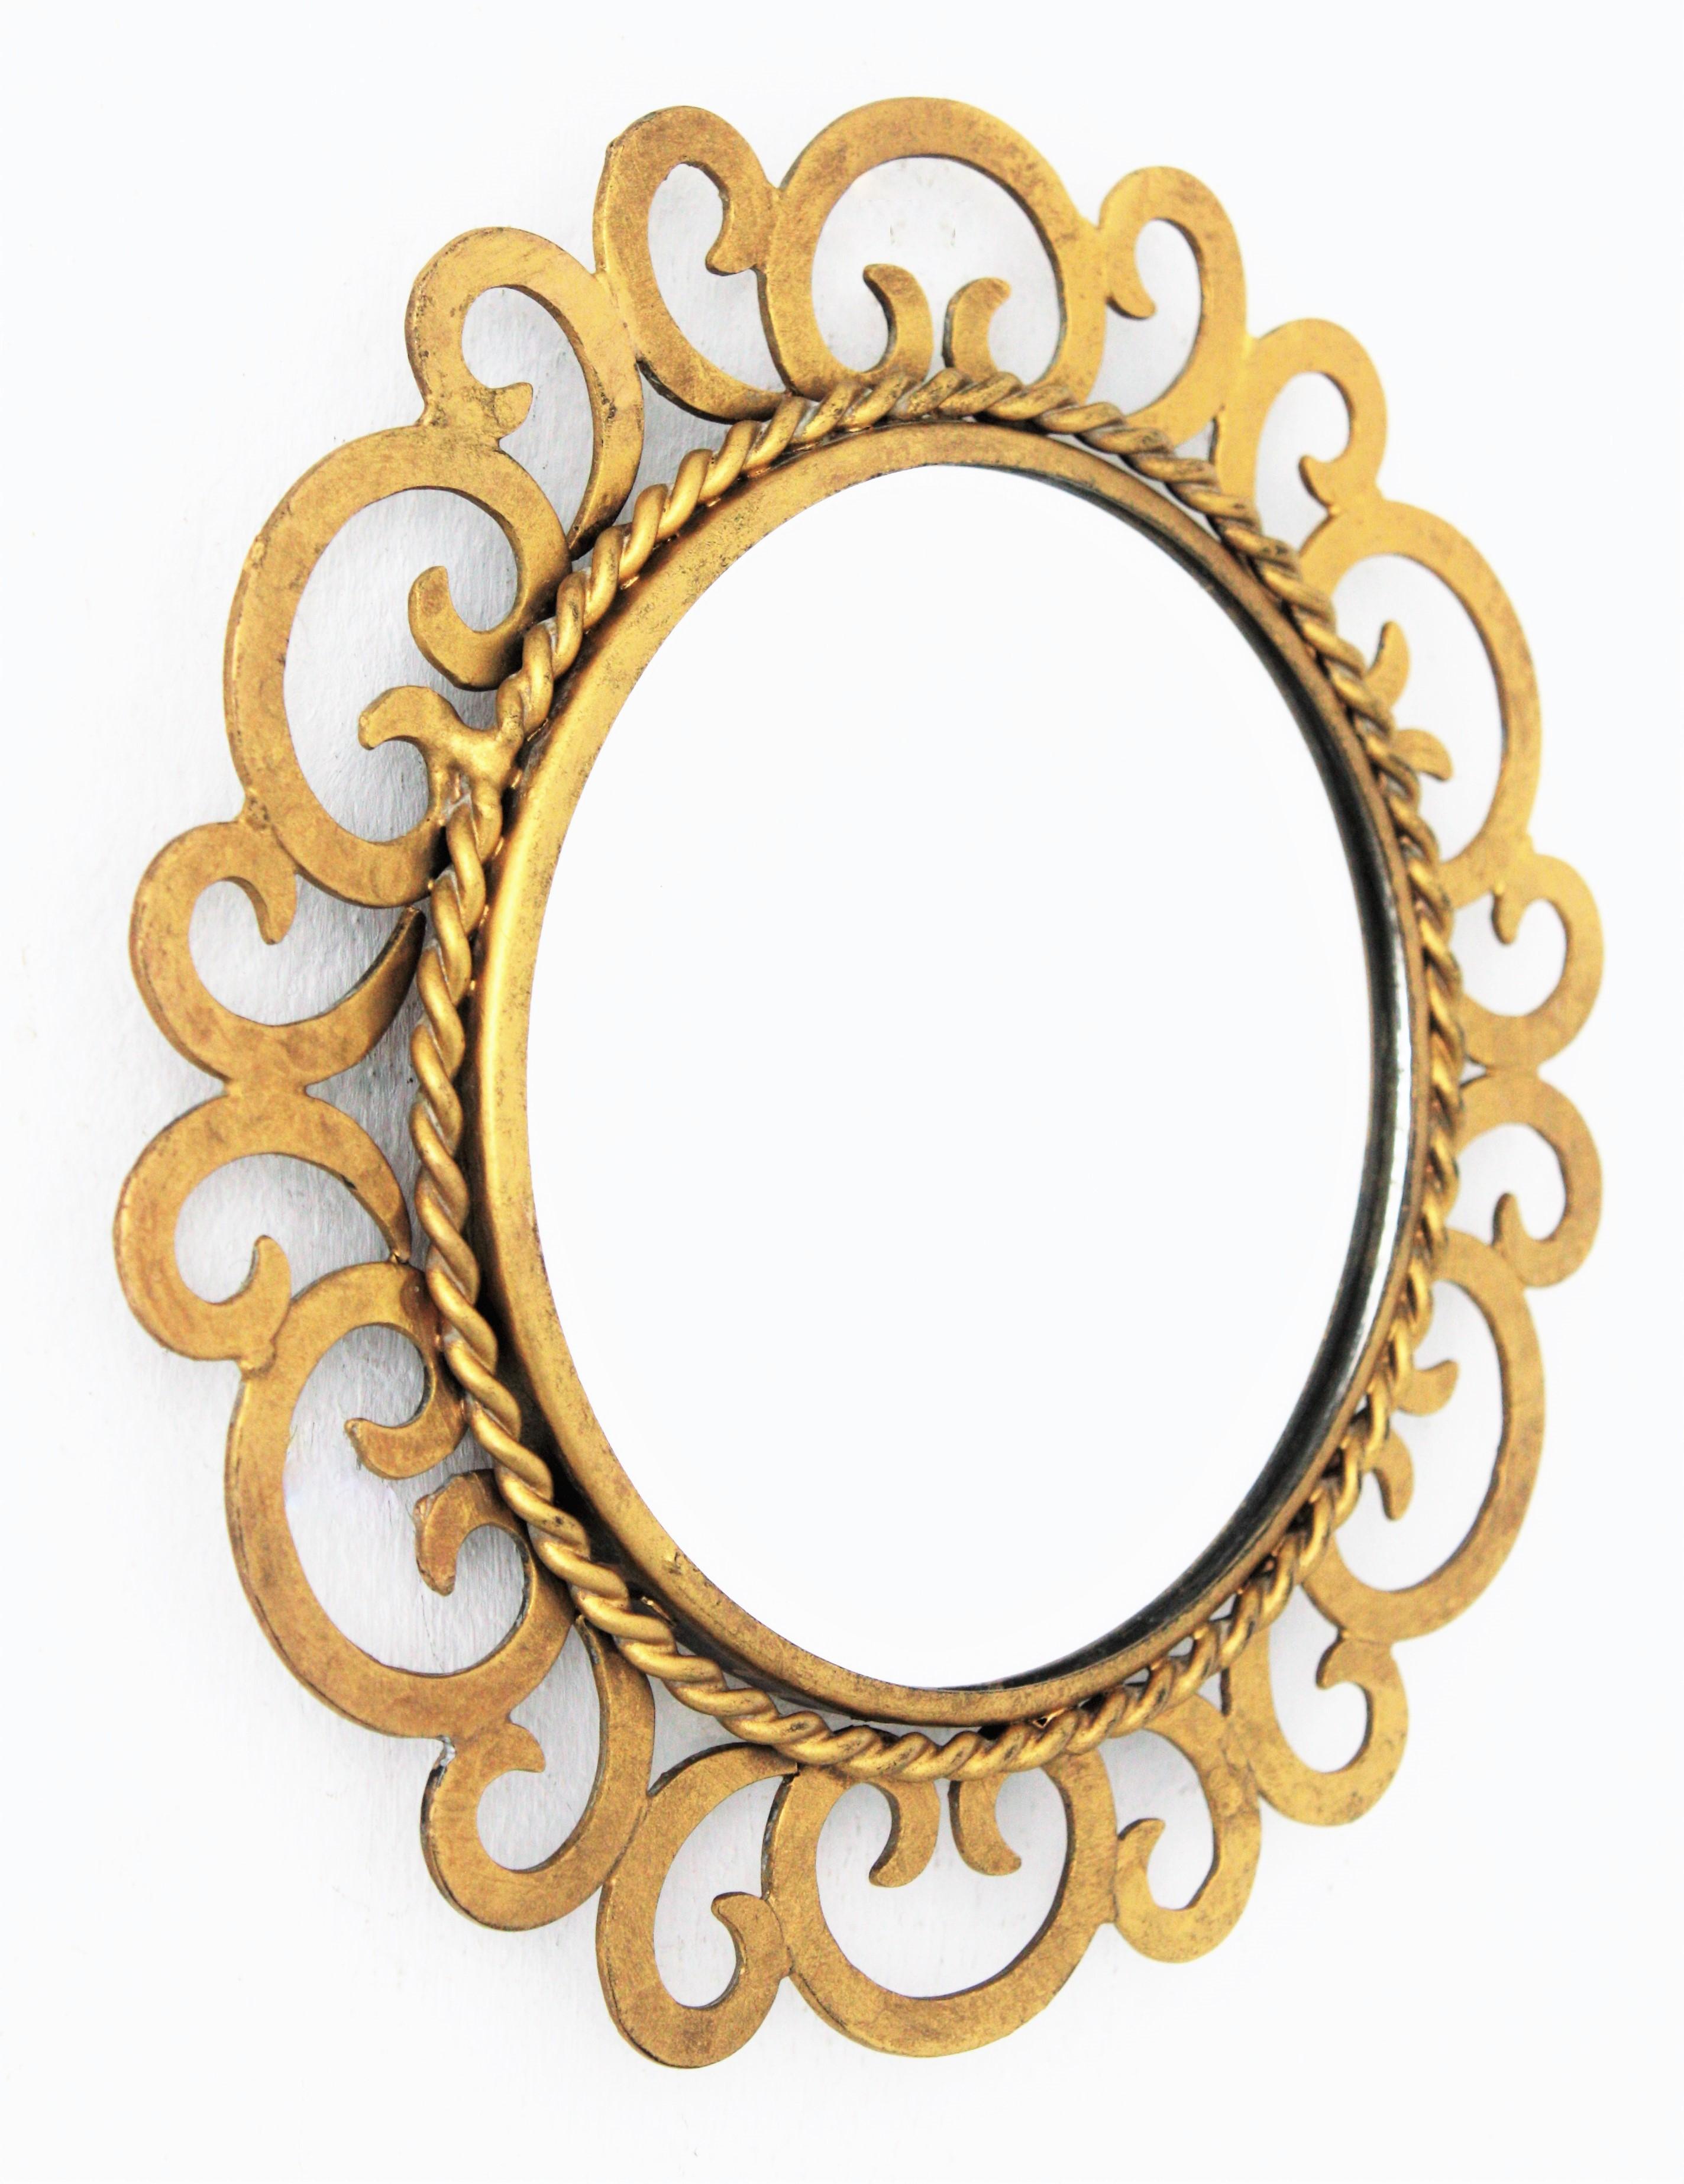 Mini Sized Sunburst Mirror with Scrollwork, Gilt Iron In Good Condition For Sale In Barcelona, ES